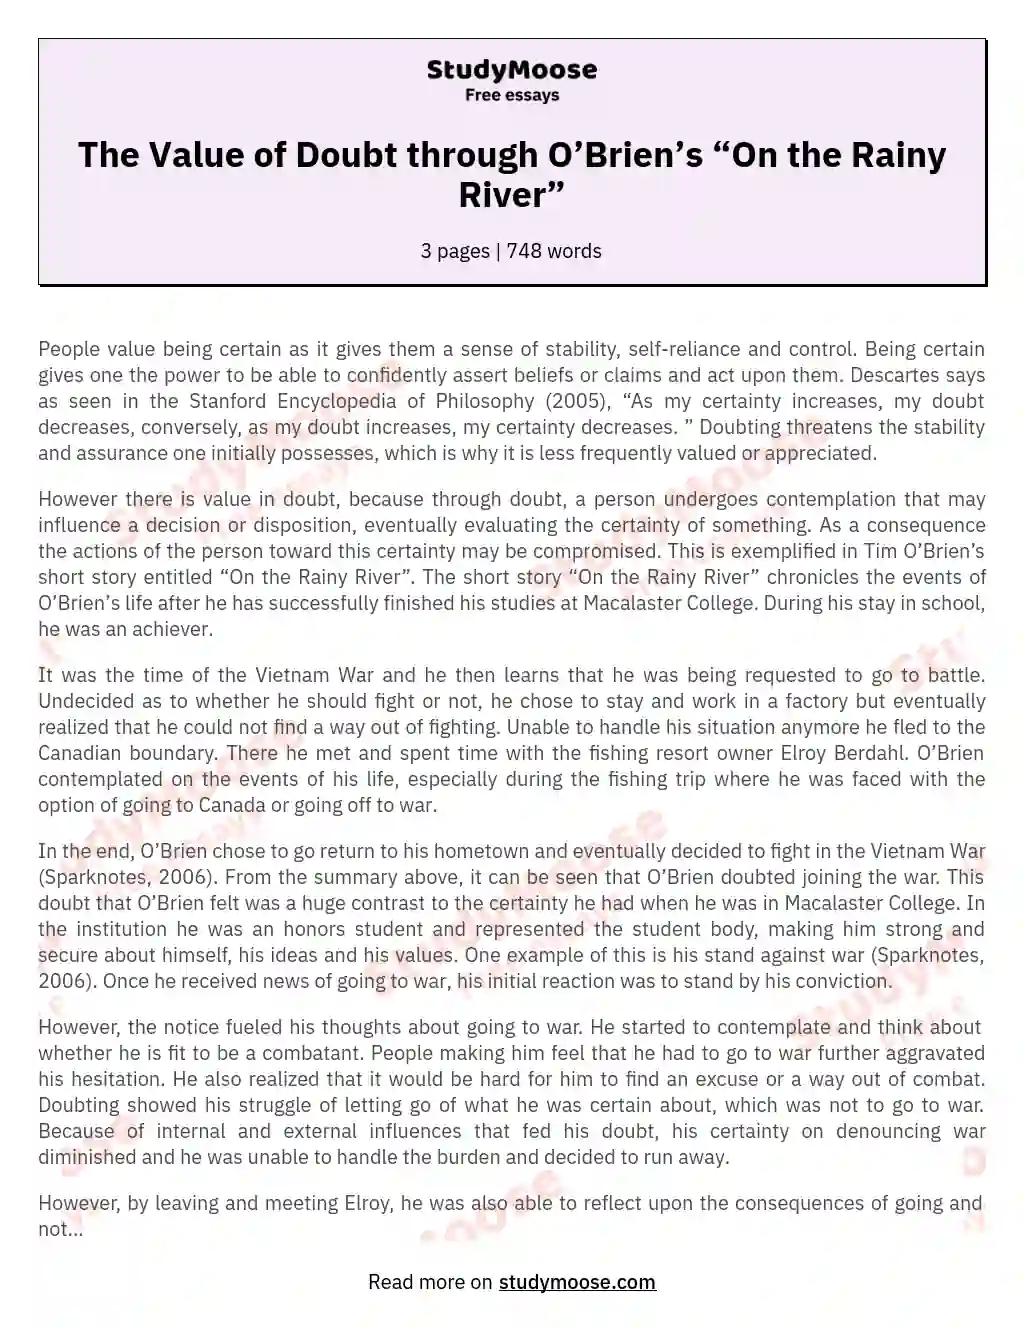 The Value of Doubt through O’Brien’s “On the Rainy River” essay